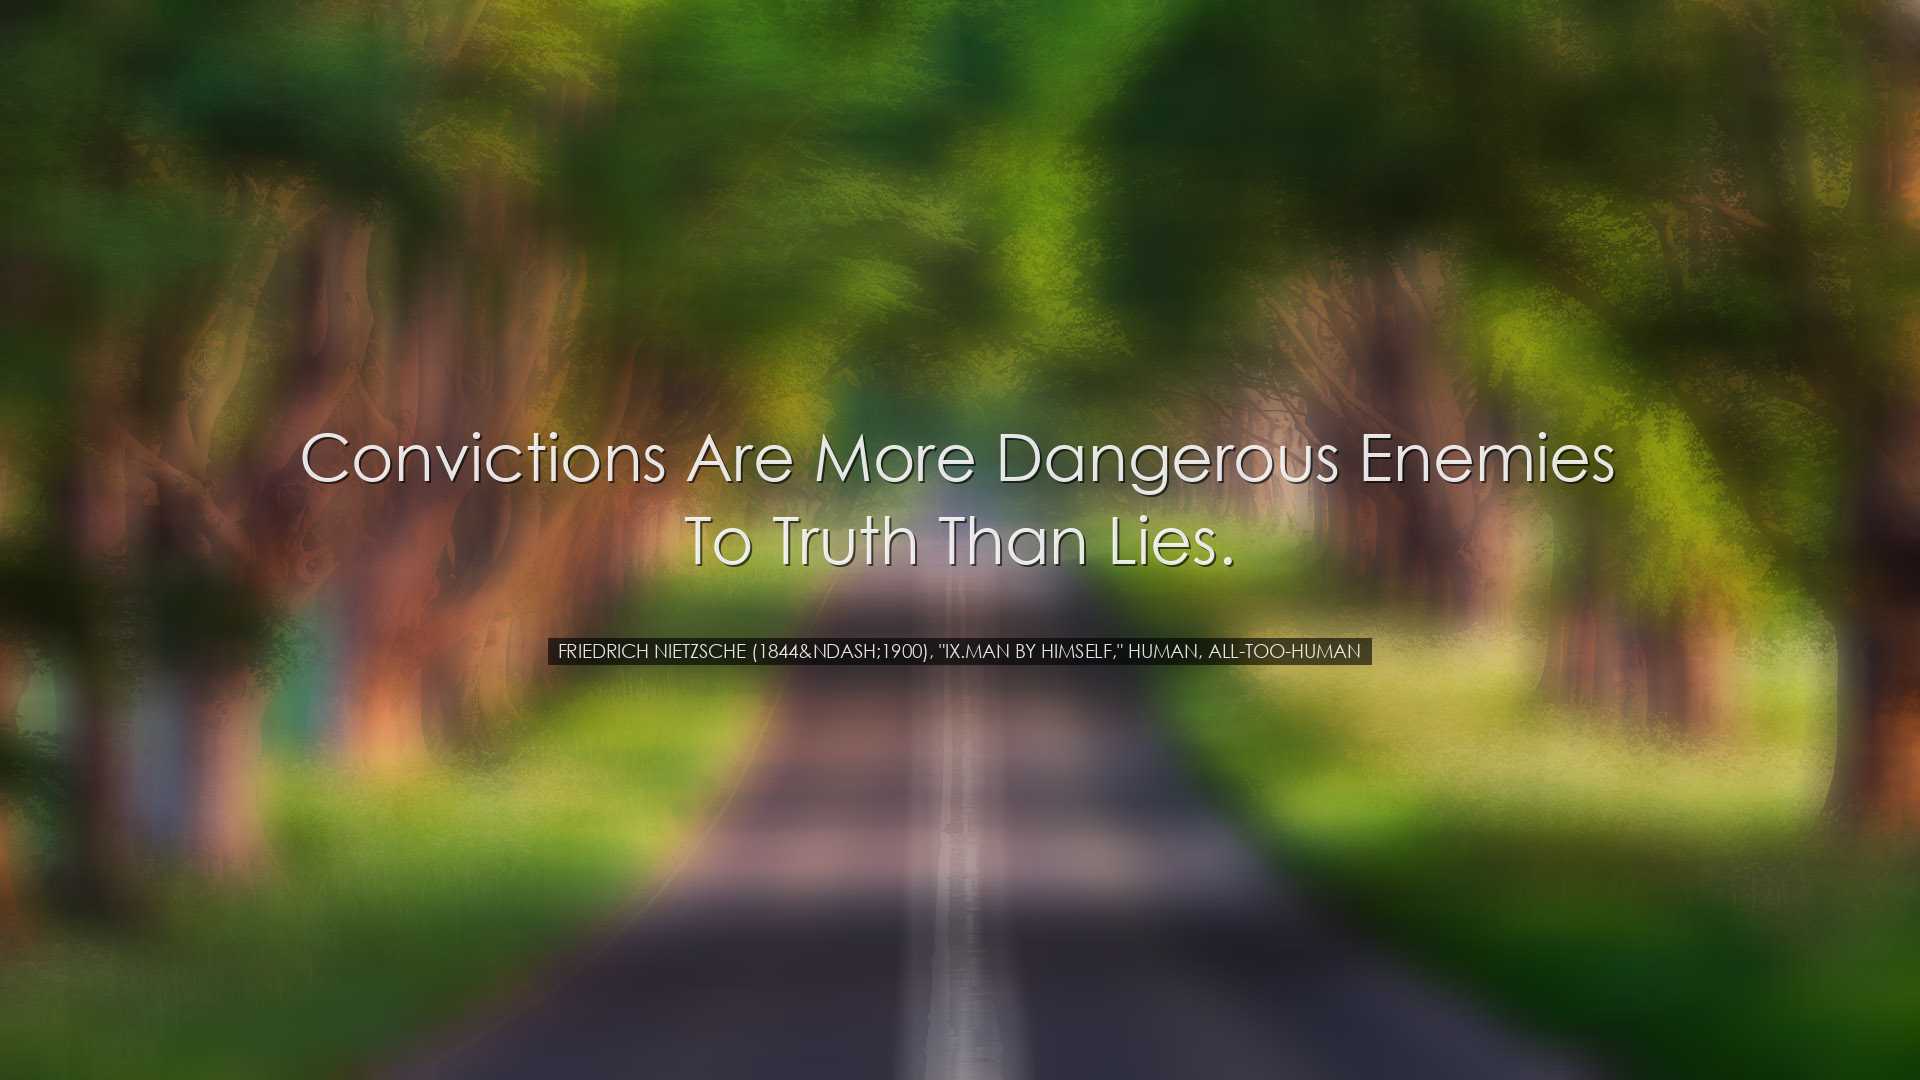 Convictions are more dangerous enemies to truth than lies. - Fried